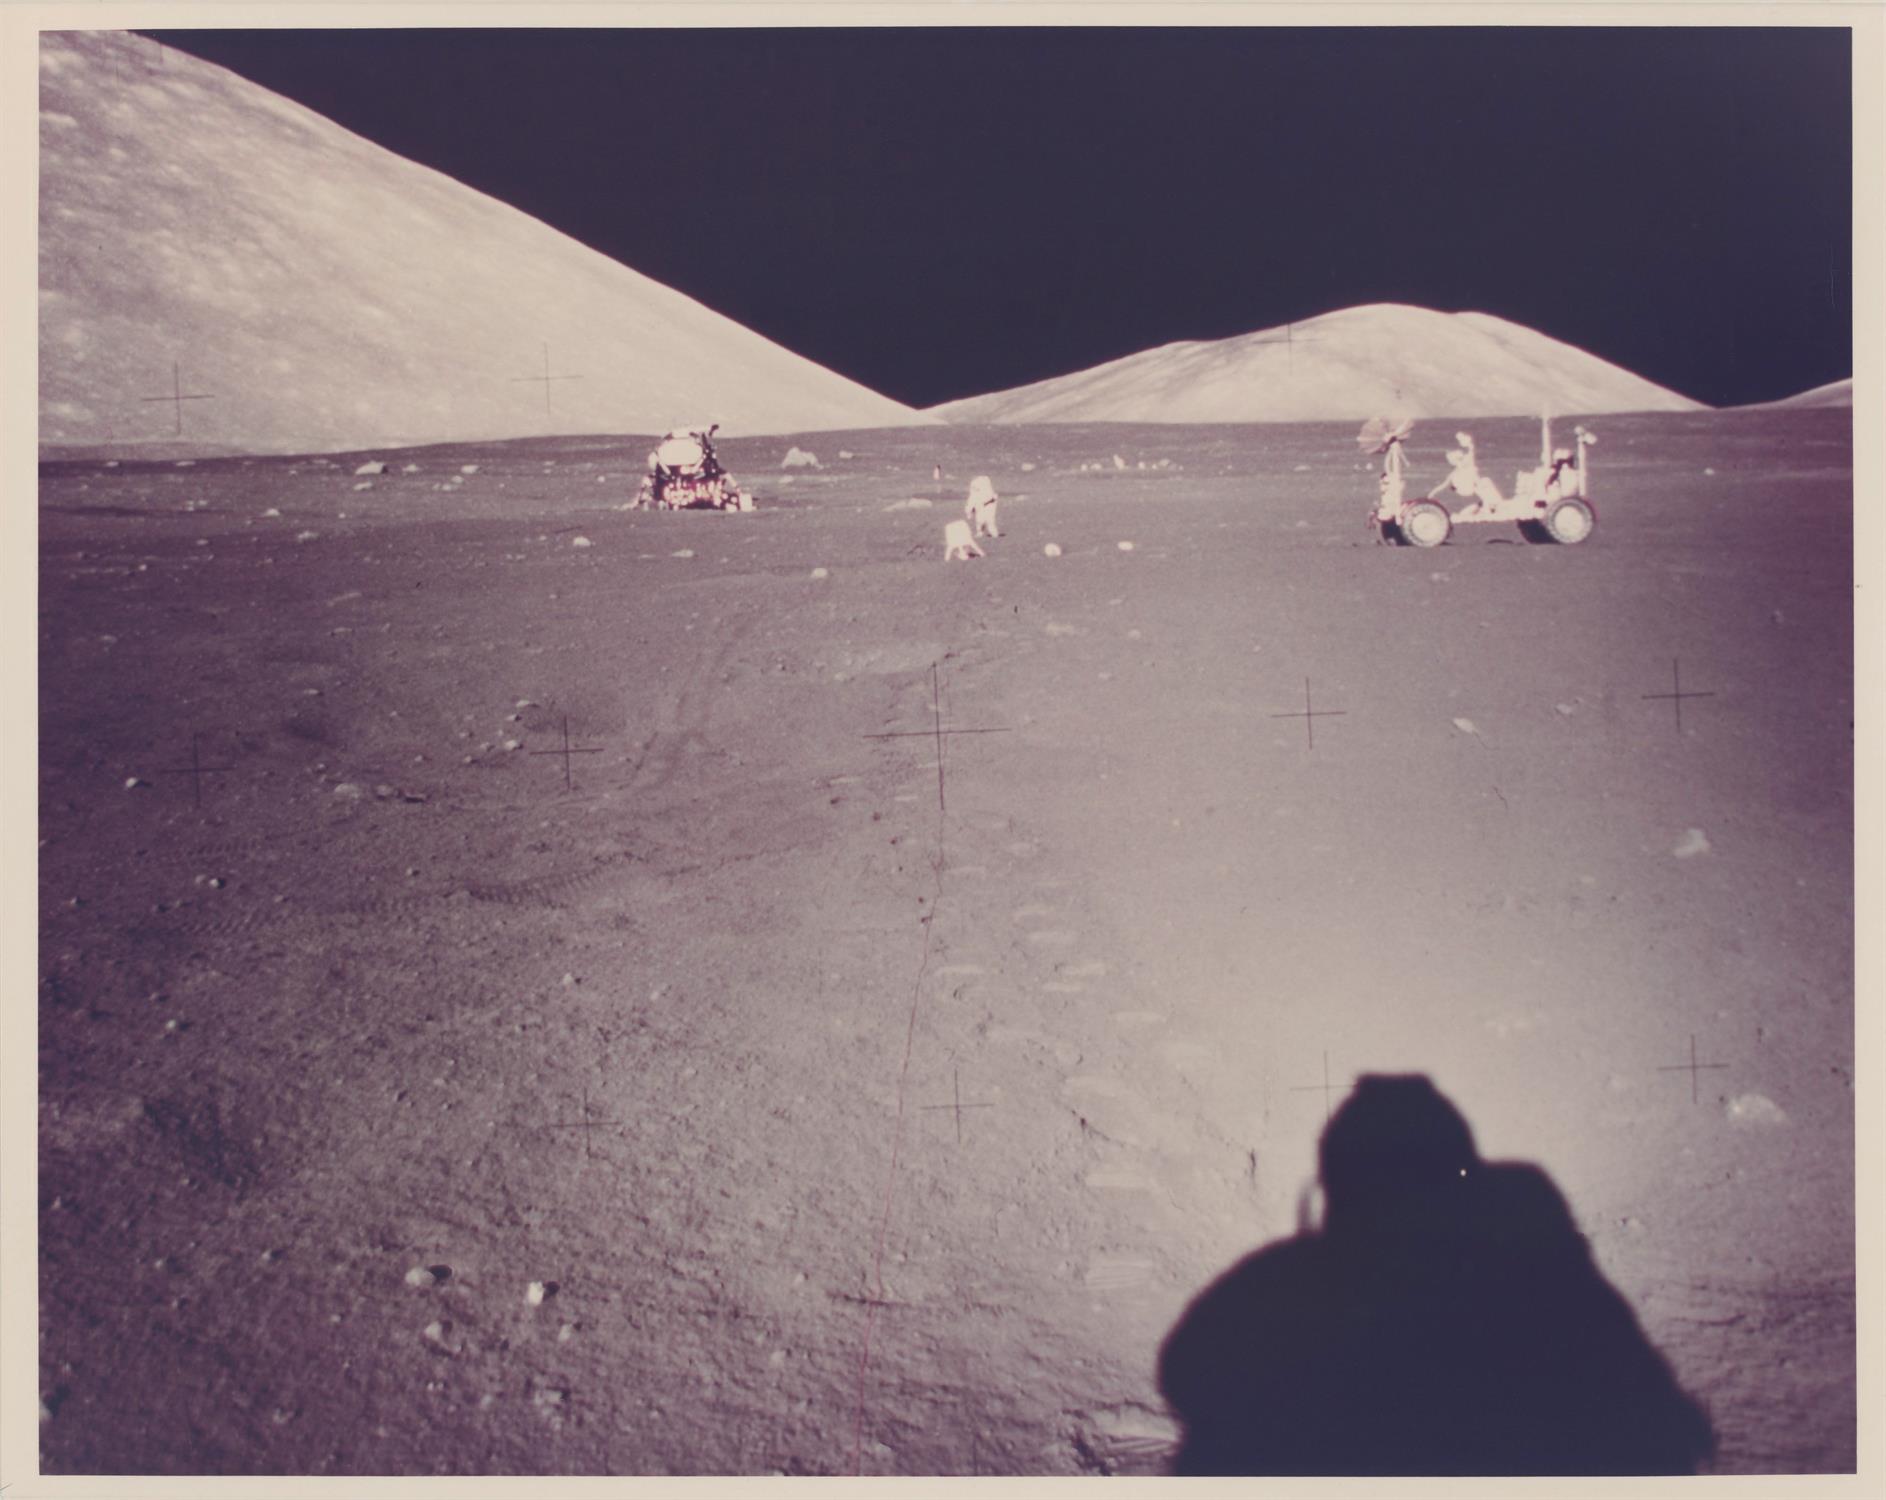 Lunar scenes: Harrison Schmitt working with the rake and at the SEP site, Apollo 17, December 1972 - Image 4 of 5